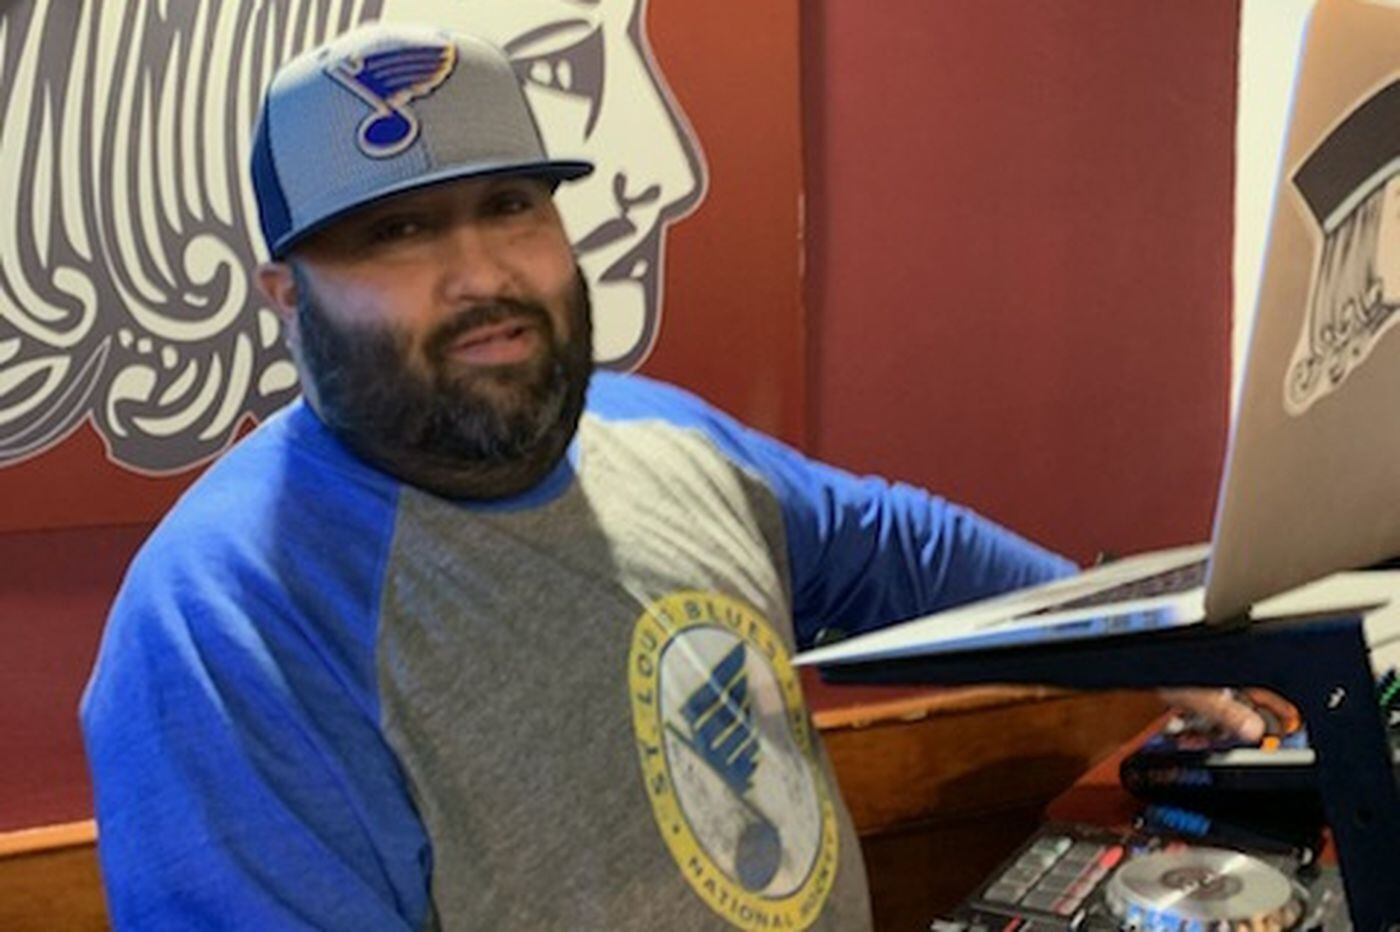 ‘Play Gloria’: The South Philly guy who constantly plays the song for St. Louis Blues fans